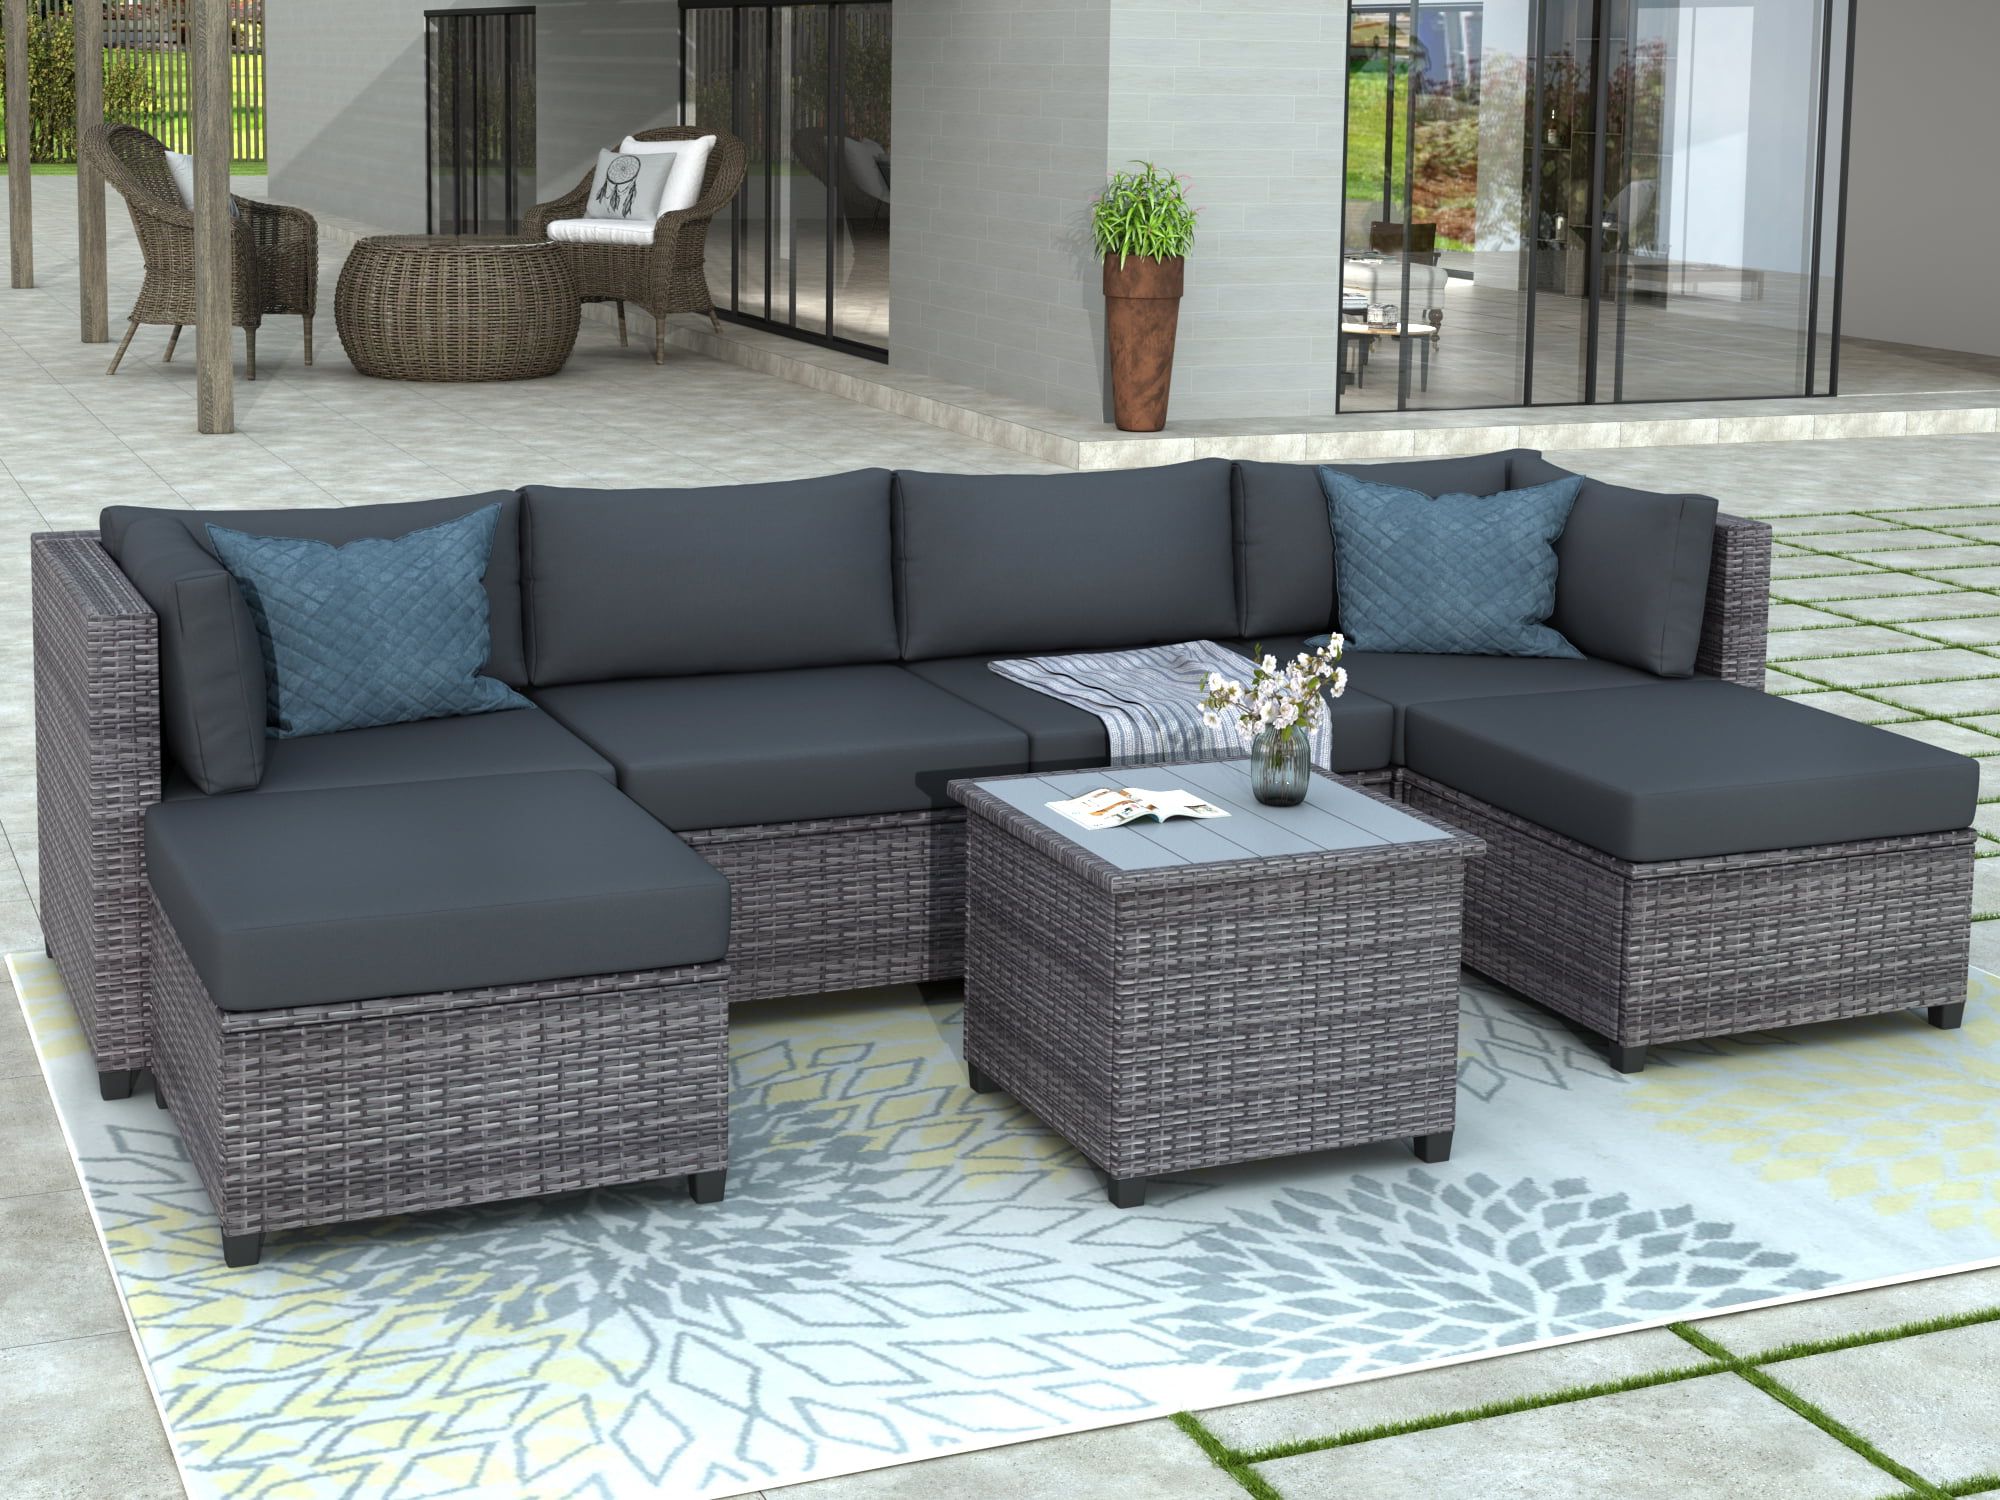 Most Up To Date Ottomans Patio Furniture Set Regarding 7 Piece Patio Furniture Set With 4 Rattan Wicker Chairs, 2 Ottoman, Coffee  Table, All Weather Outdoor Conversation Set With Gray Cushions For  Backyard, Porch, Garden, Poolside, L5017 – Walmart (Photo 13 of 15)